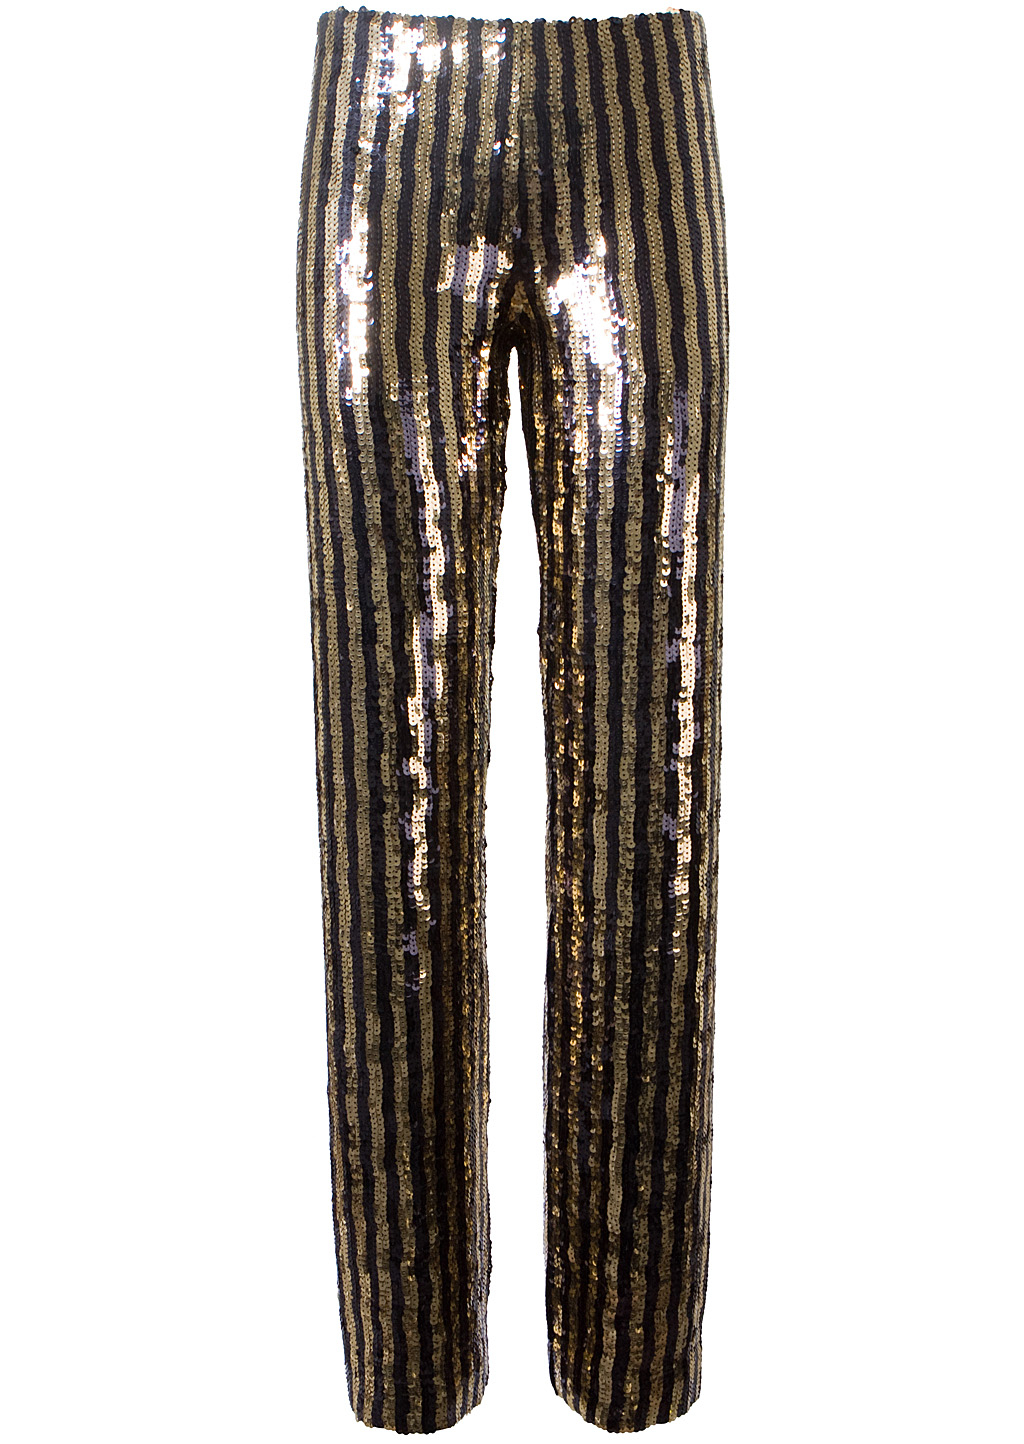 Marc Jacobs Metallic Gold and Black Sequins Pants in Gold | Lyst